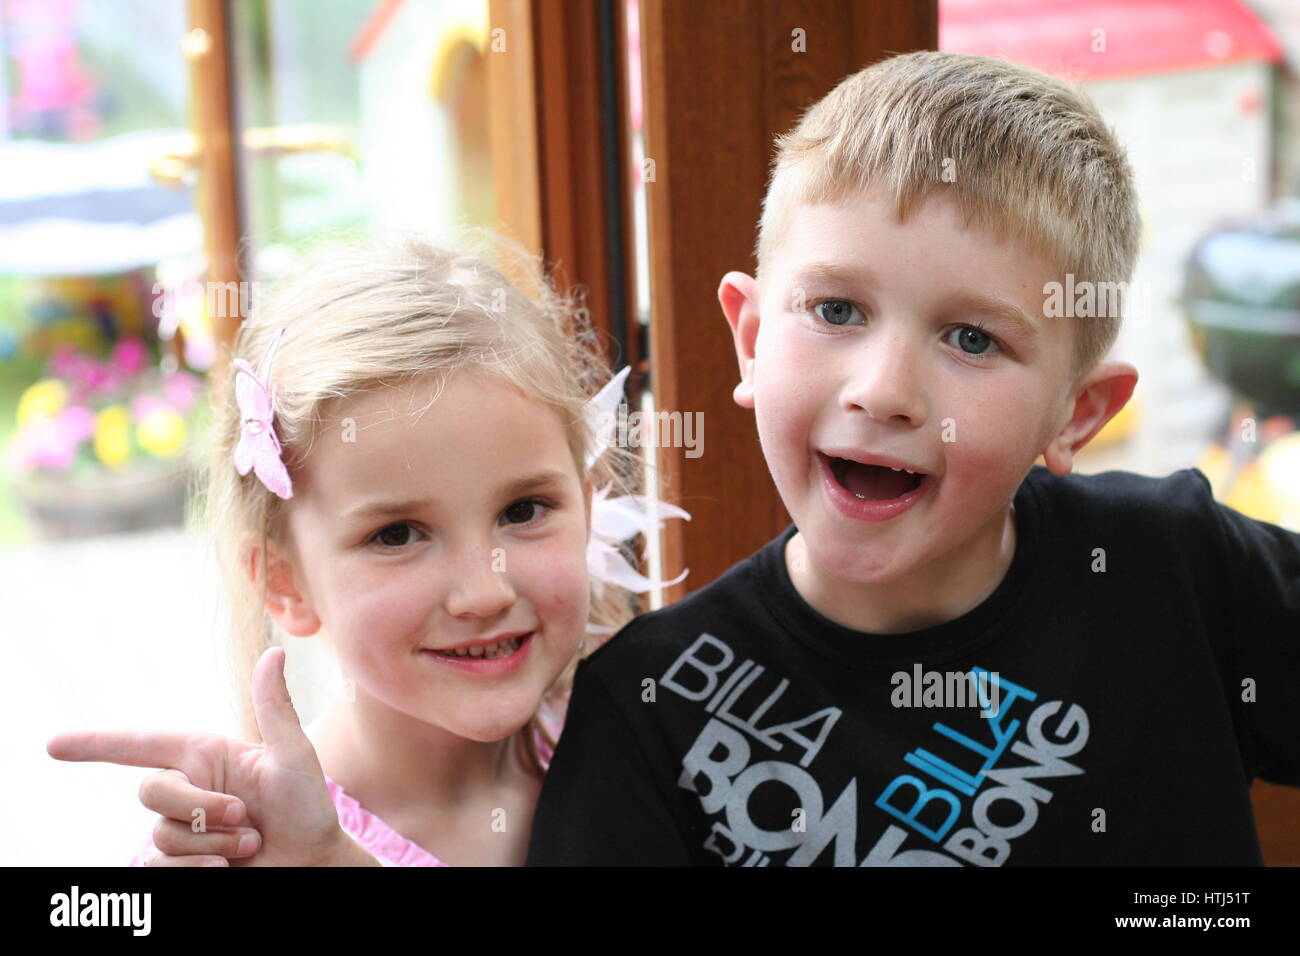 blonde boy and girl laughing, kids children messing around goofing and having fun messing together, family fun concept, happy blonde kids fun concept, Stock Photo